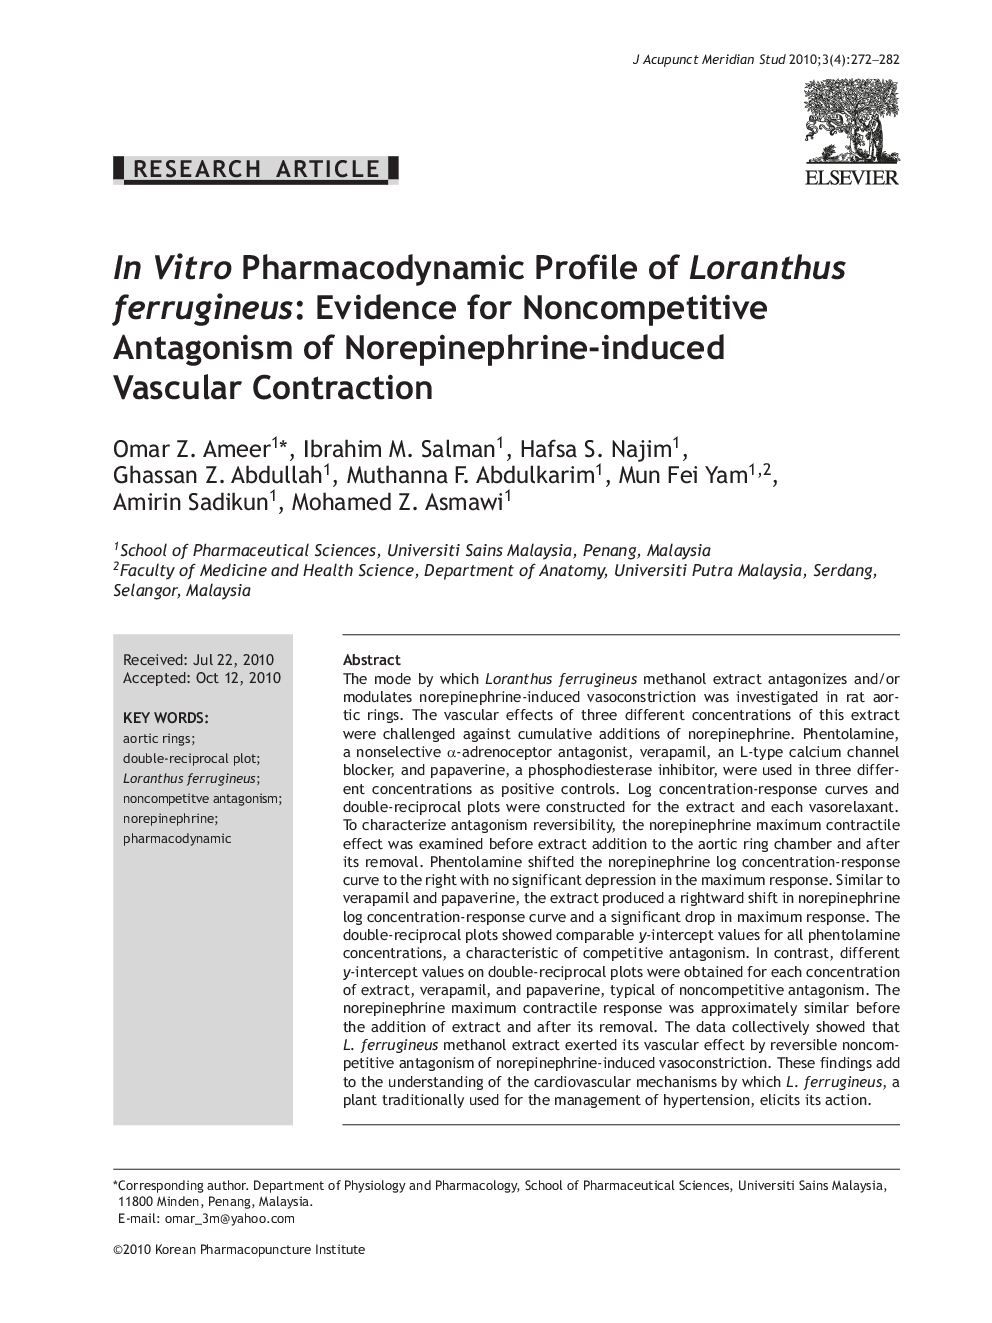 In Vitro Pharmacodynamic Profile of Loranthus ferrugineus: Evidence for Noncompetitive Antagonism of Norepinephrine-induced Vascular Contraction